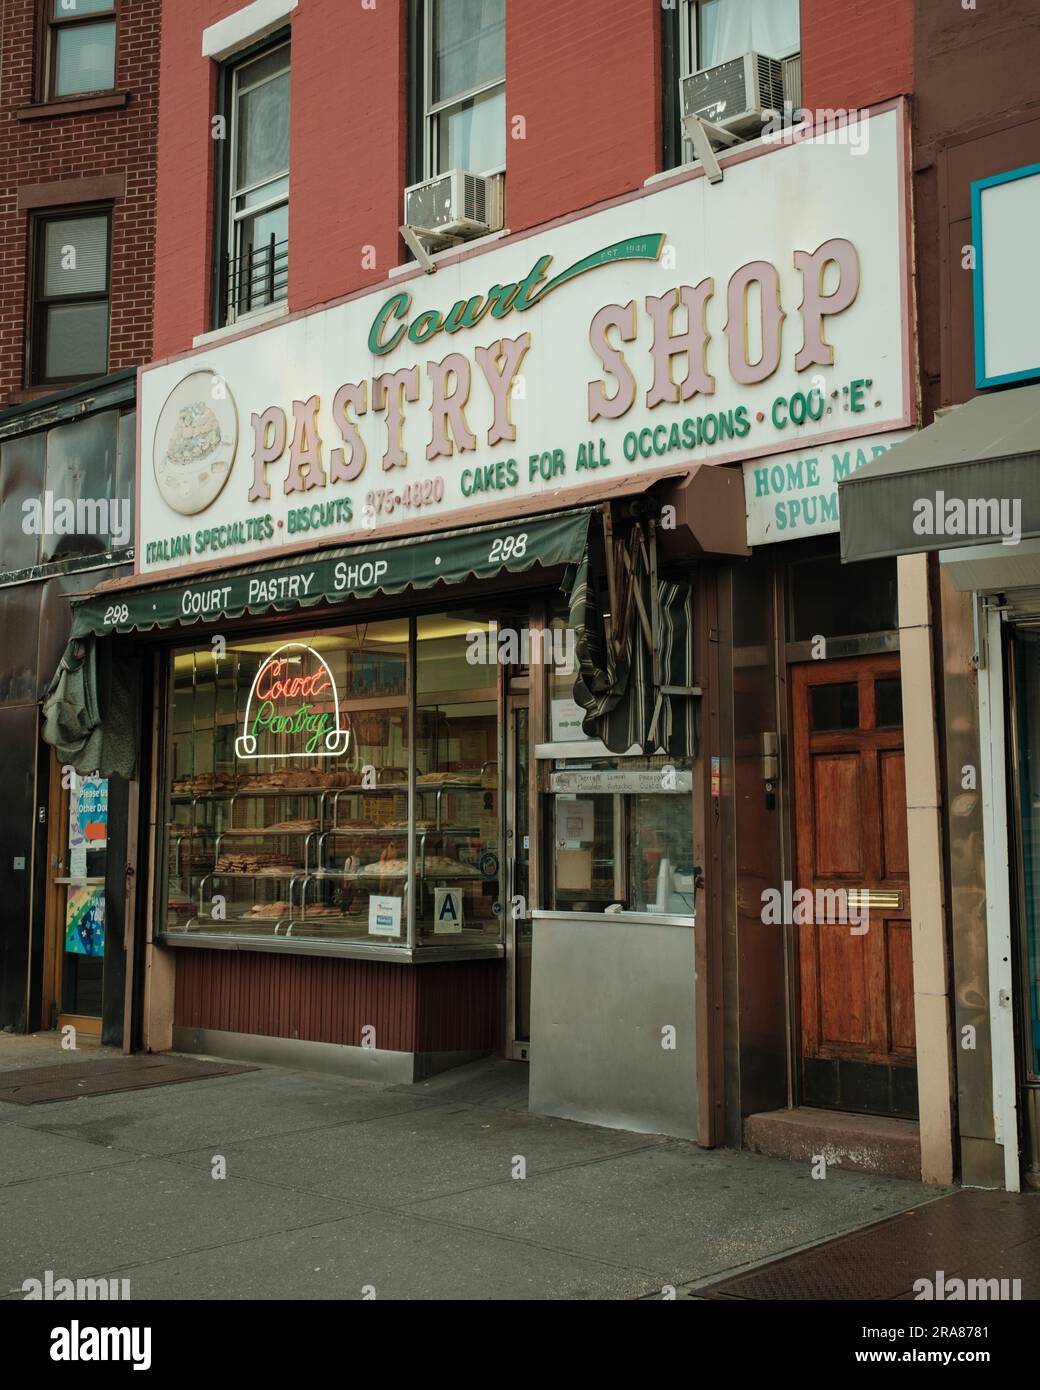 Court Pastry Shop in Cobble Hill, Brooklyn, New York Stockfoto